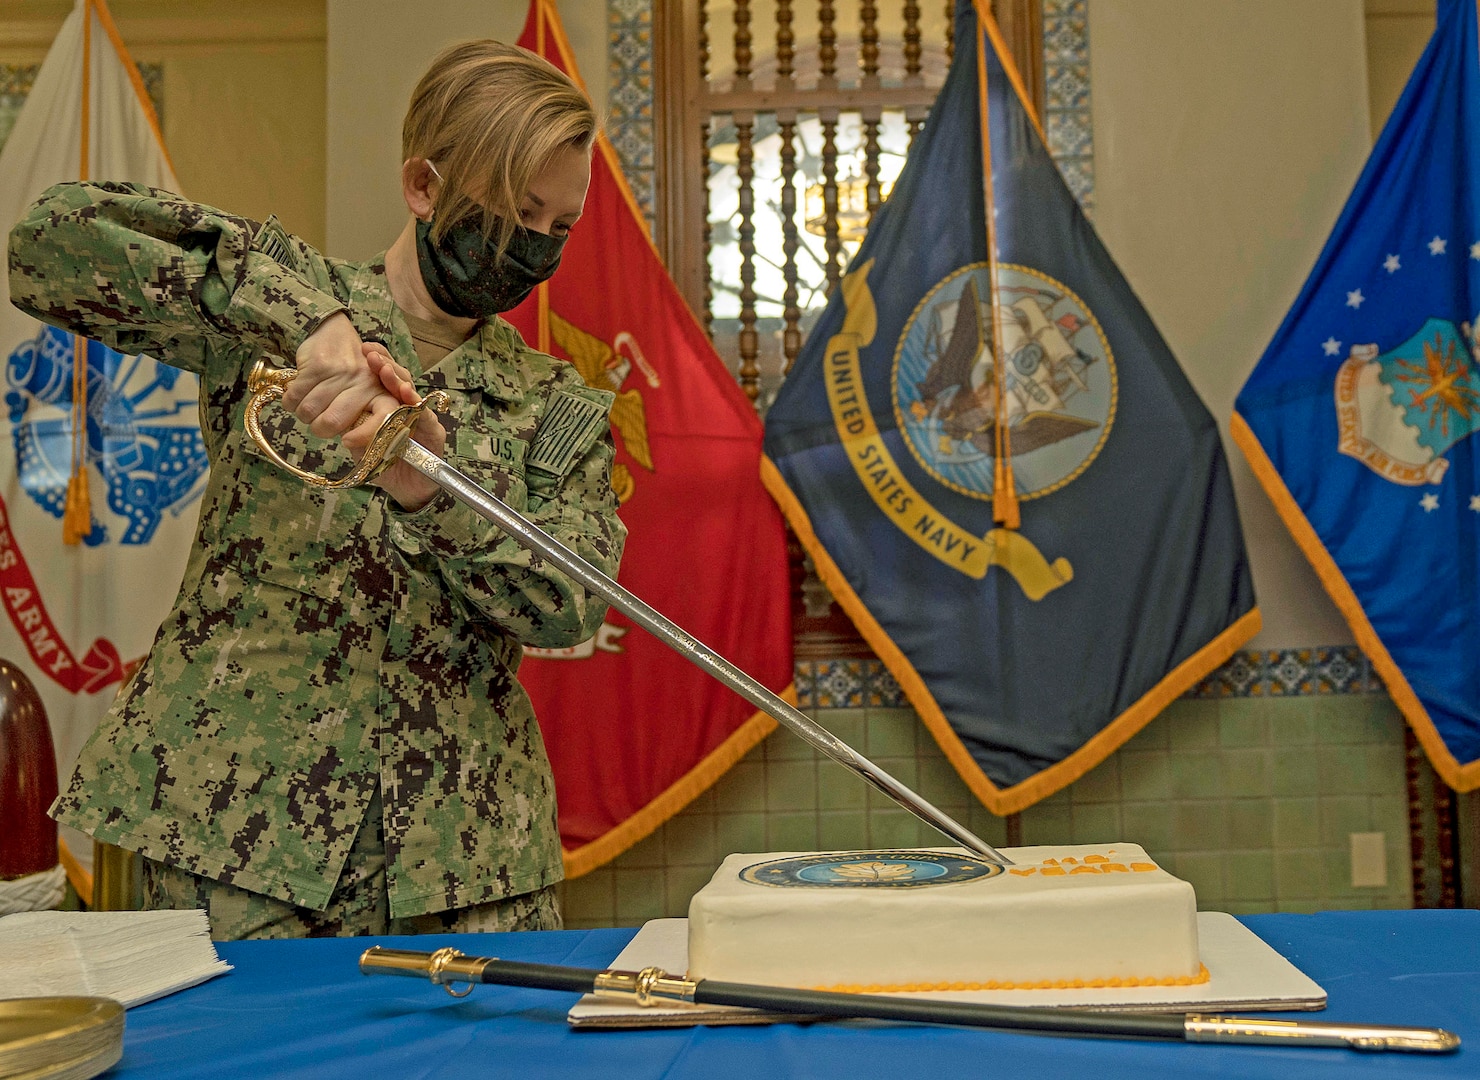 Lt. Cmdr. Kellie Haney, the executive assistant of Naval Medical Forces Support Command (NMFSC), the junior nurse at NMFSC cuts a cake in honor of the Navy Nurse Corps 112th birthday.